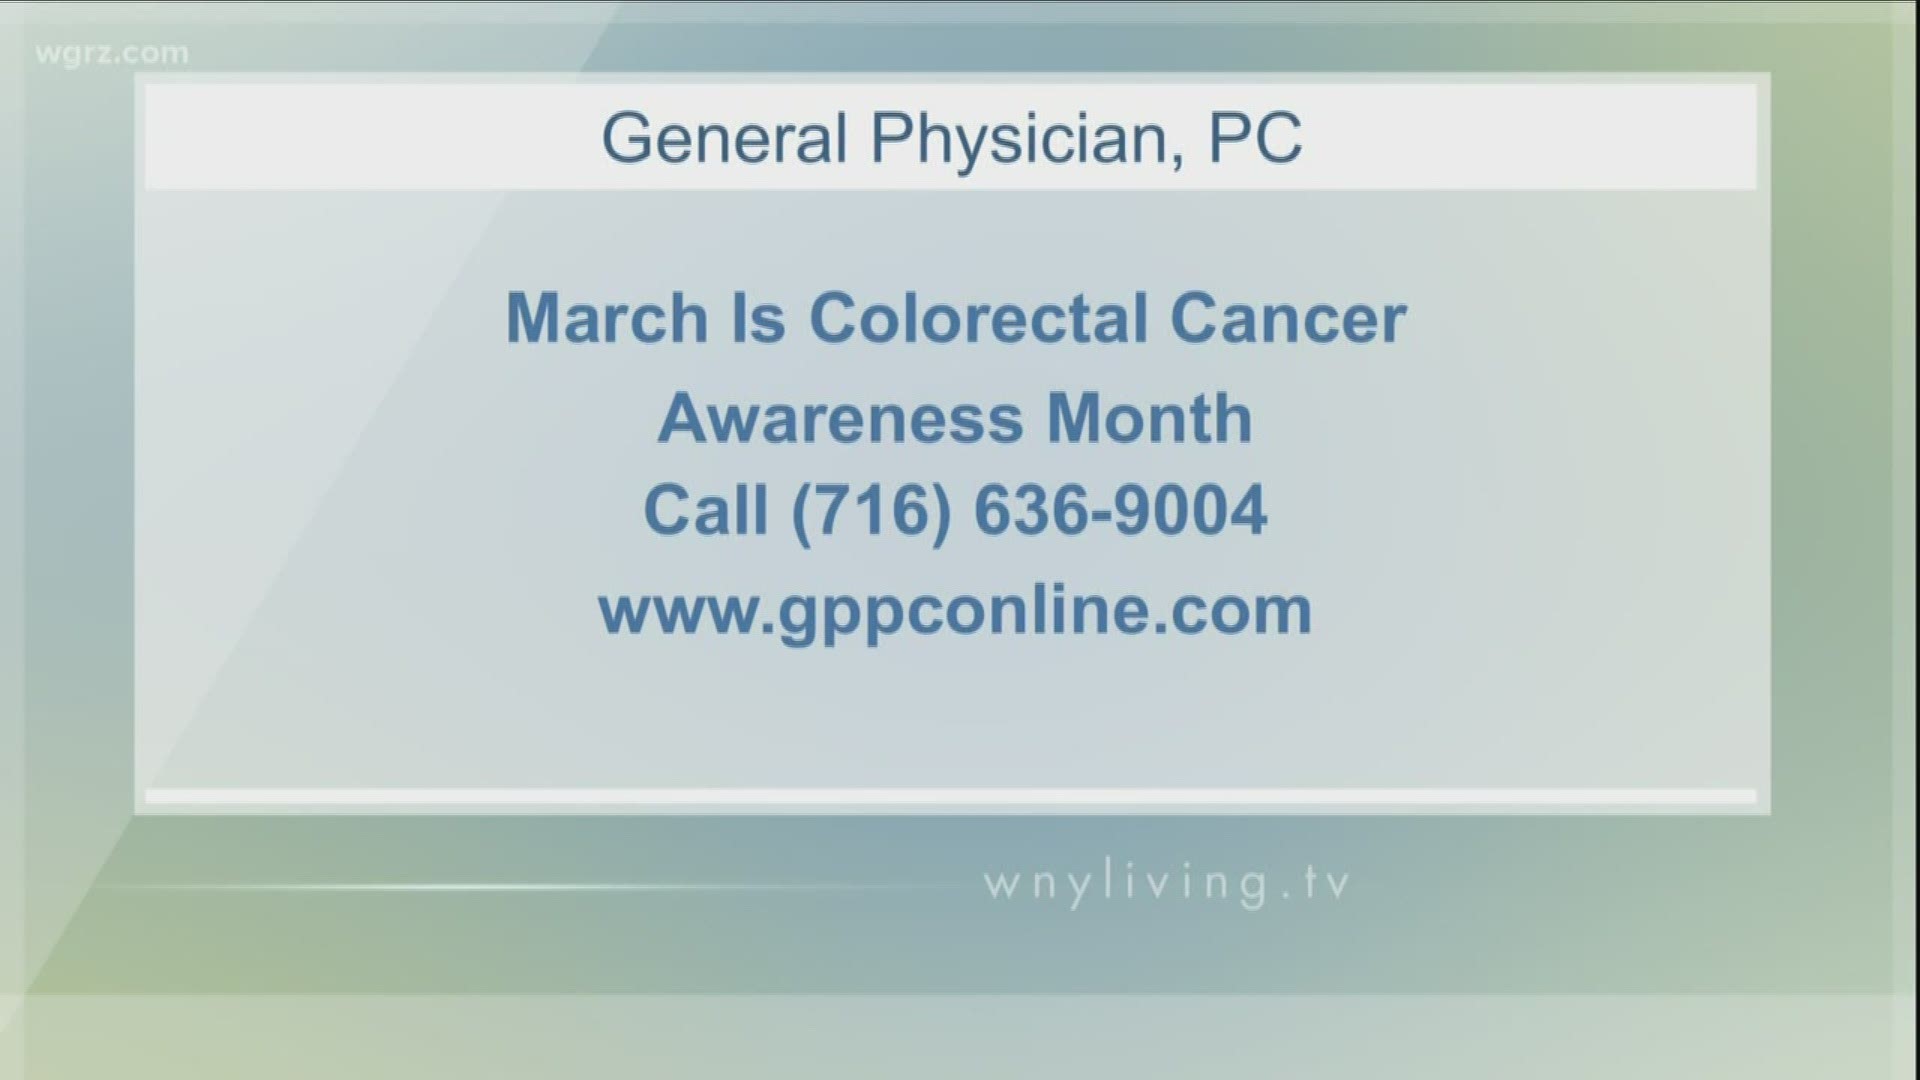 March 7 - General Physician, PC (THIS VIDEO IS SPONSORED BY GENERAL PHYSICIAN, PC)